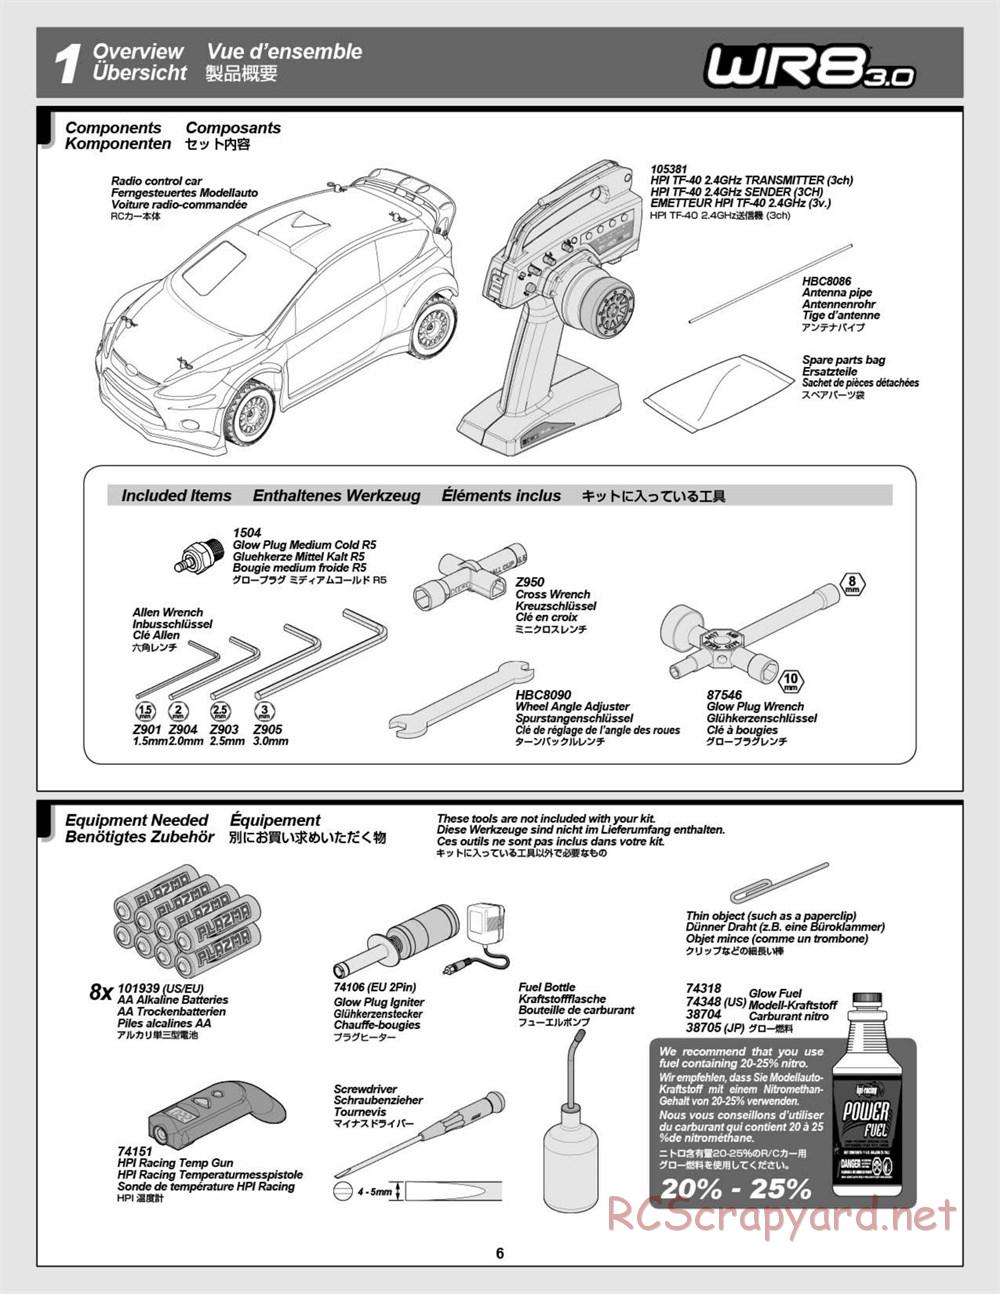 HPI - WR8 3.0 - Manual - Page 6